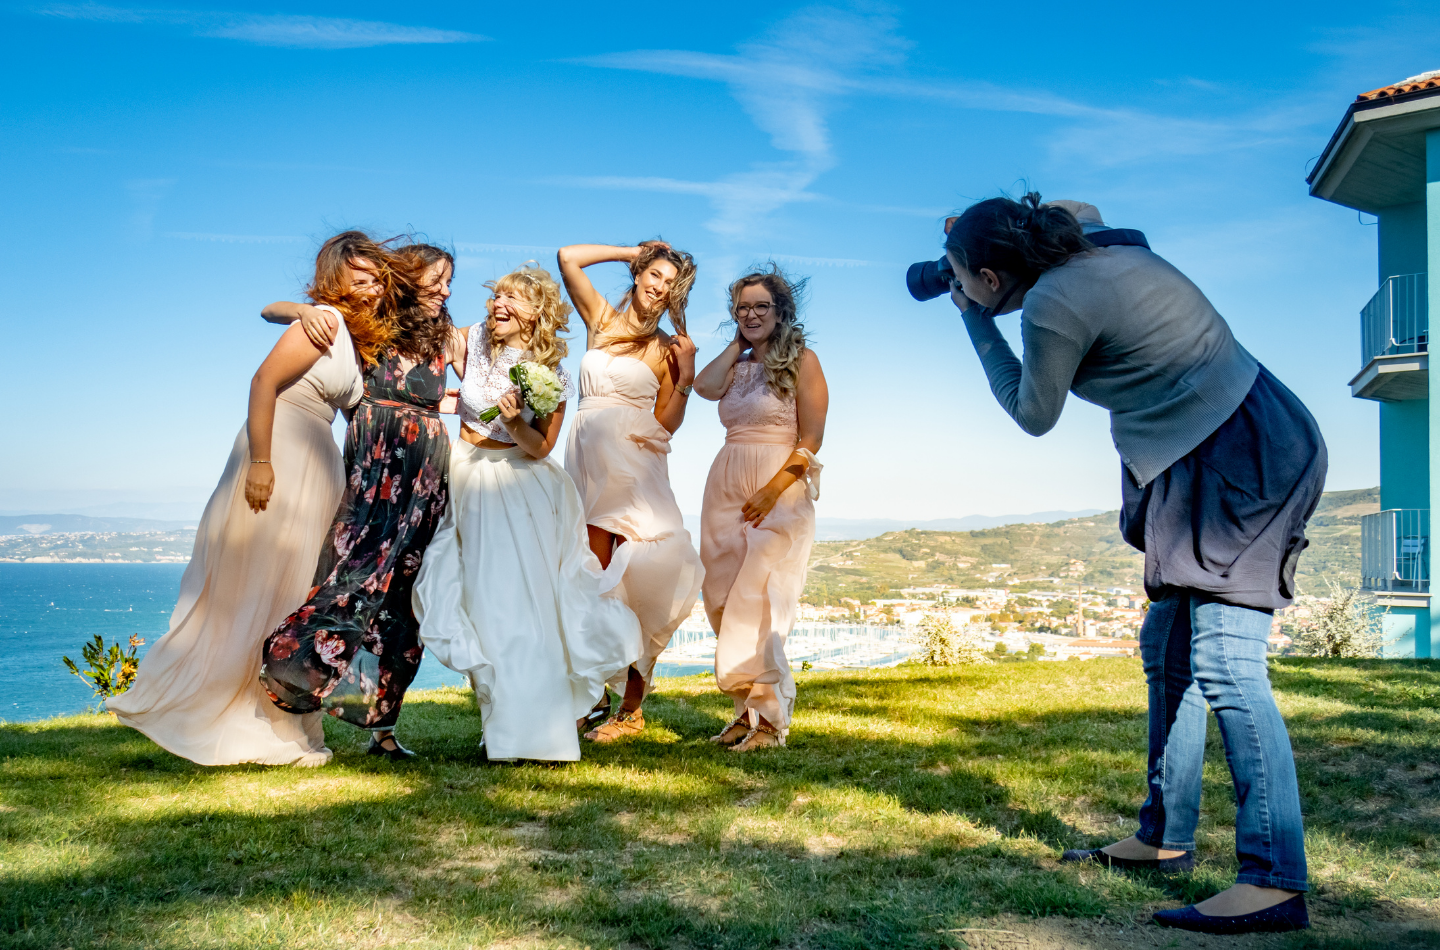 How to Grow Your Wedding Photography Business? Best Tips.